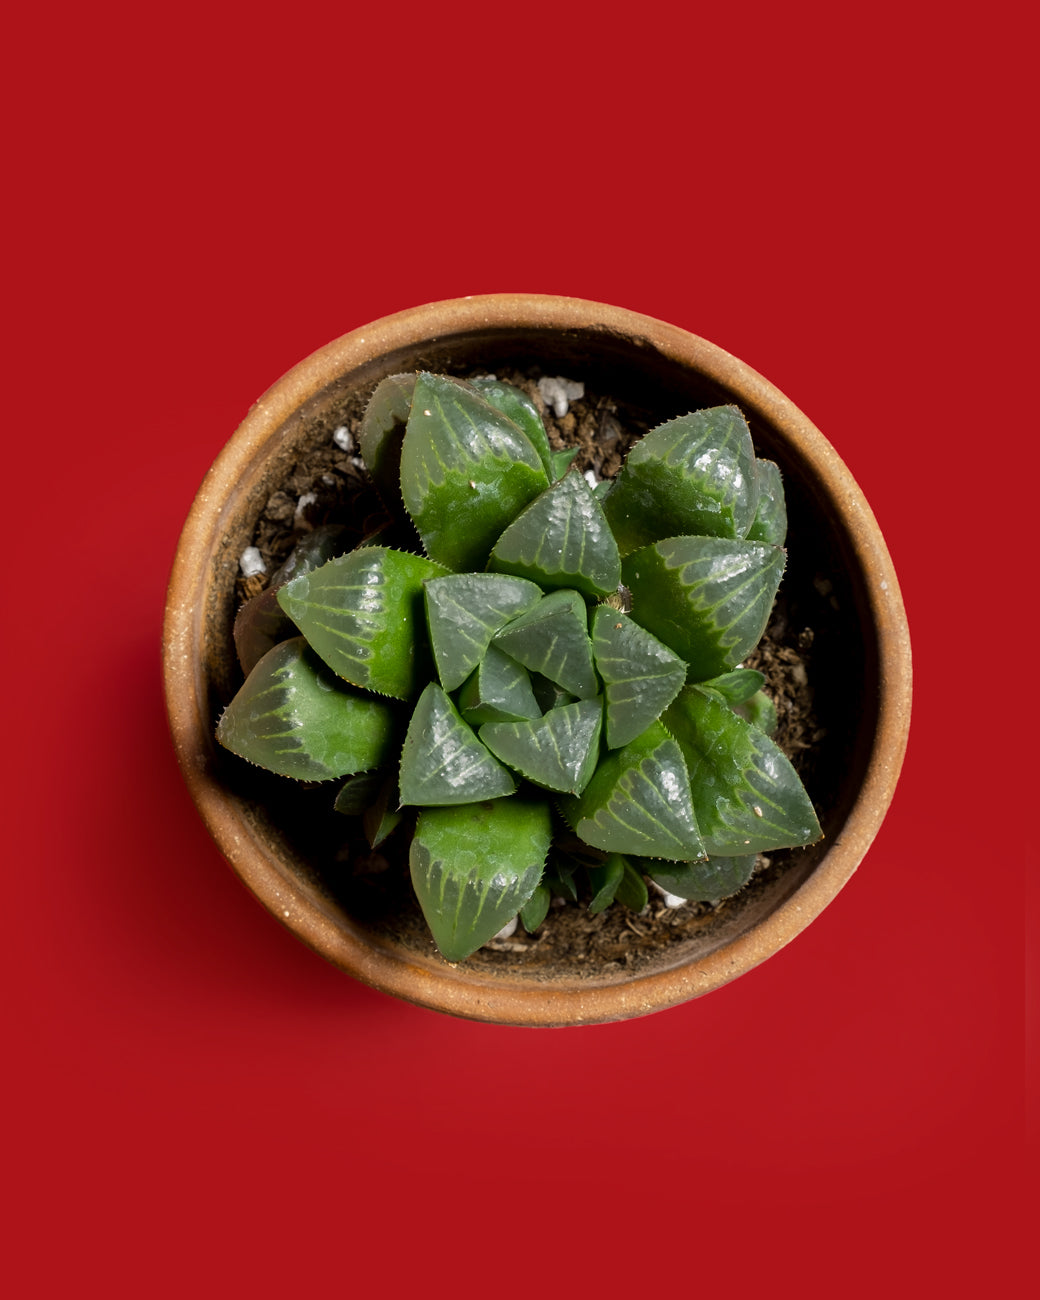 Haworthia mirabilis, a rosette of thick, green leaves that are vaguely translucent, photographed at Tula Plants & Design.